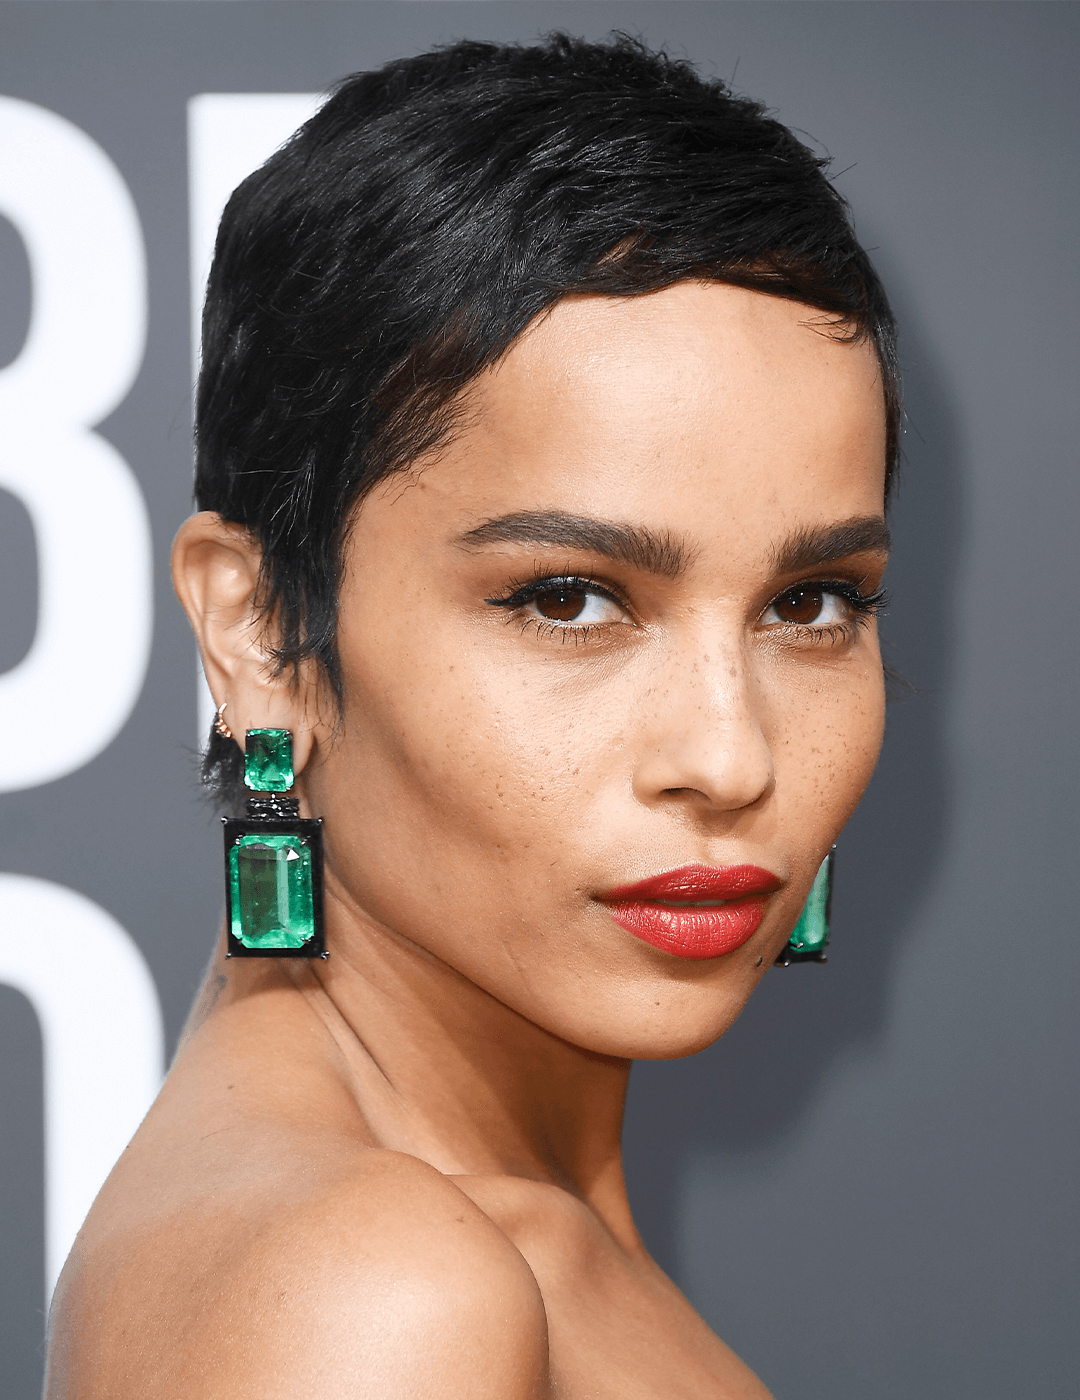 Zoe Kravitz rocking a short pixie cut hairstyle, dangling emerald earrings, and red lips makeup look